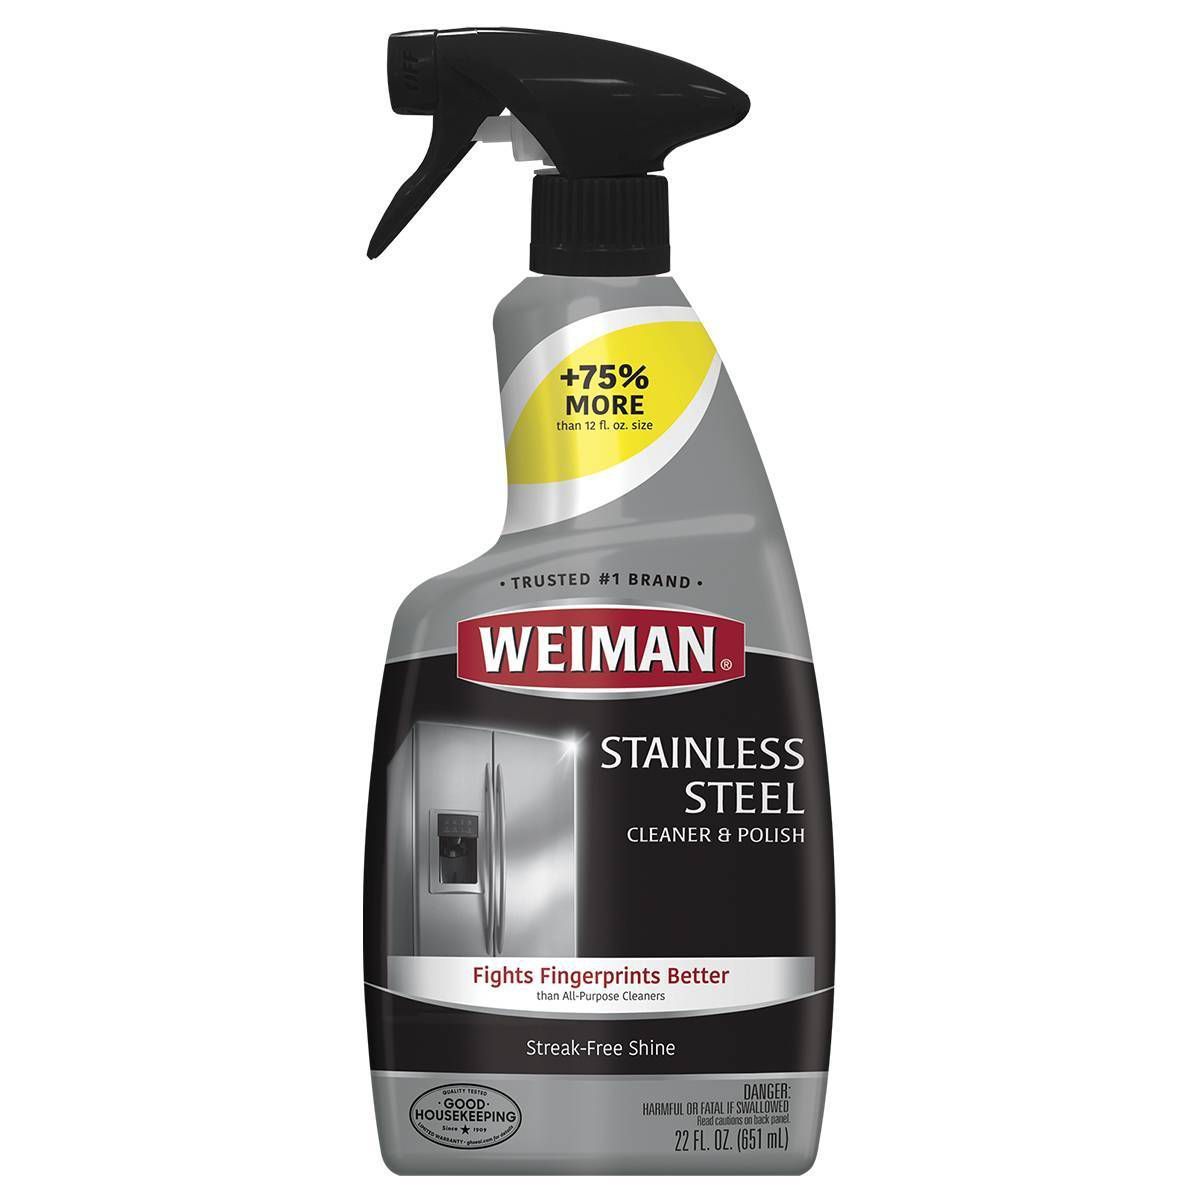 Weiman Stainless Steel Cleaner and Polish Trigger - 22 fl oz | Target